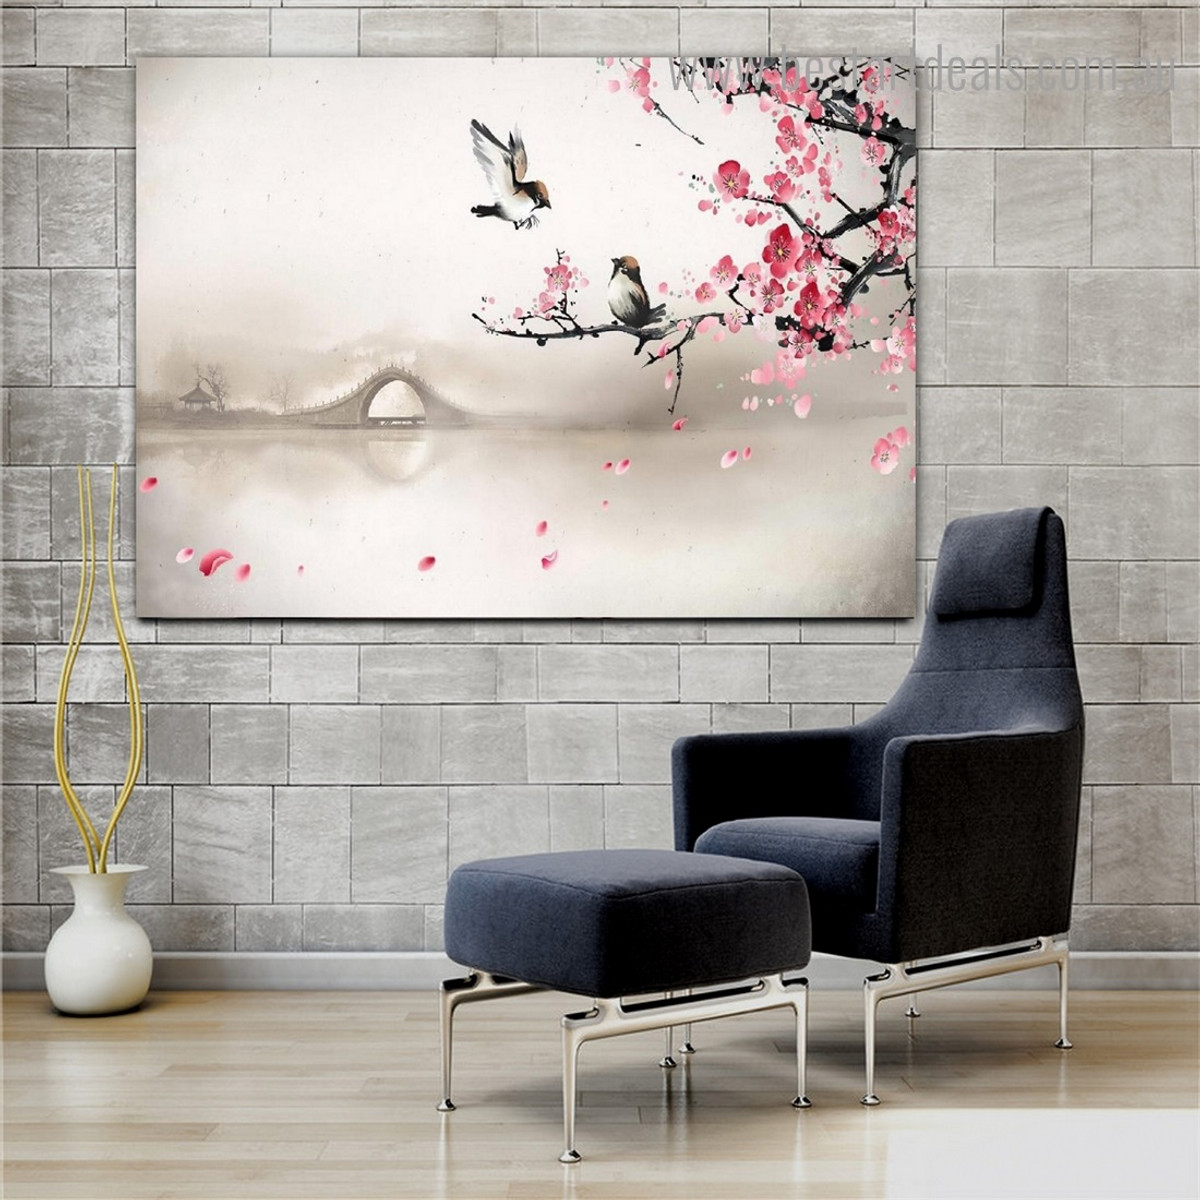 Sparrows Bird Floral Nature Framed Artwork Image Canvas Print for Room Wall Decor